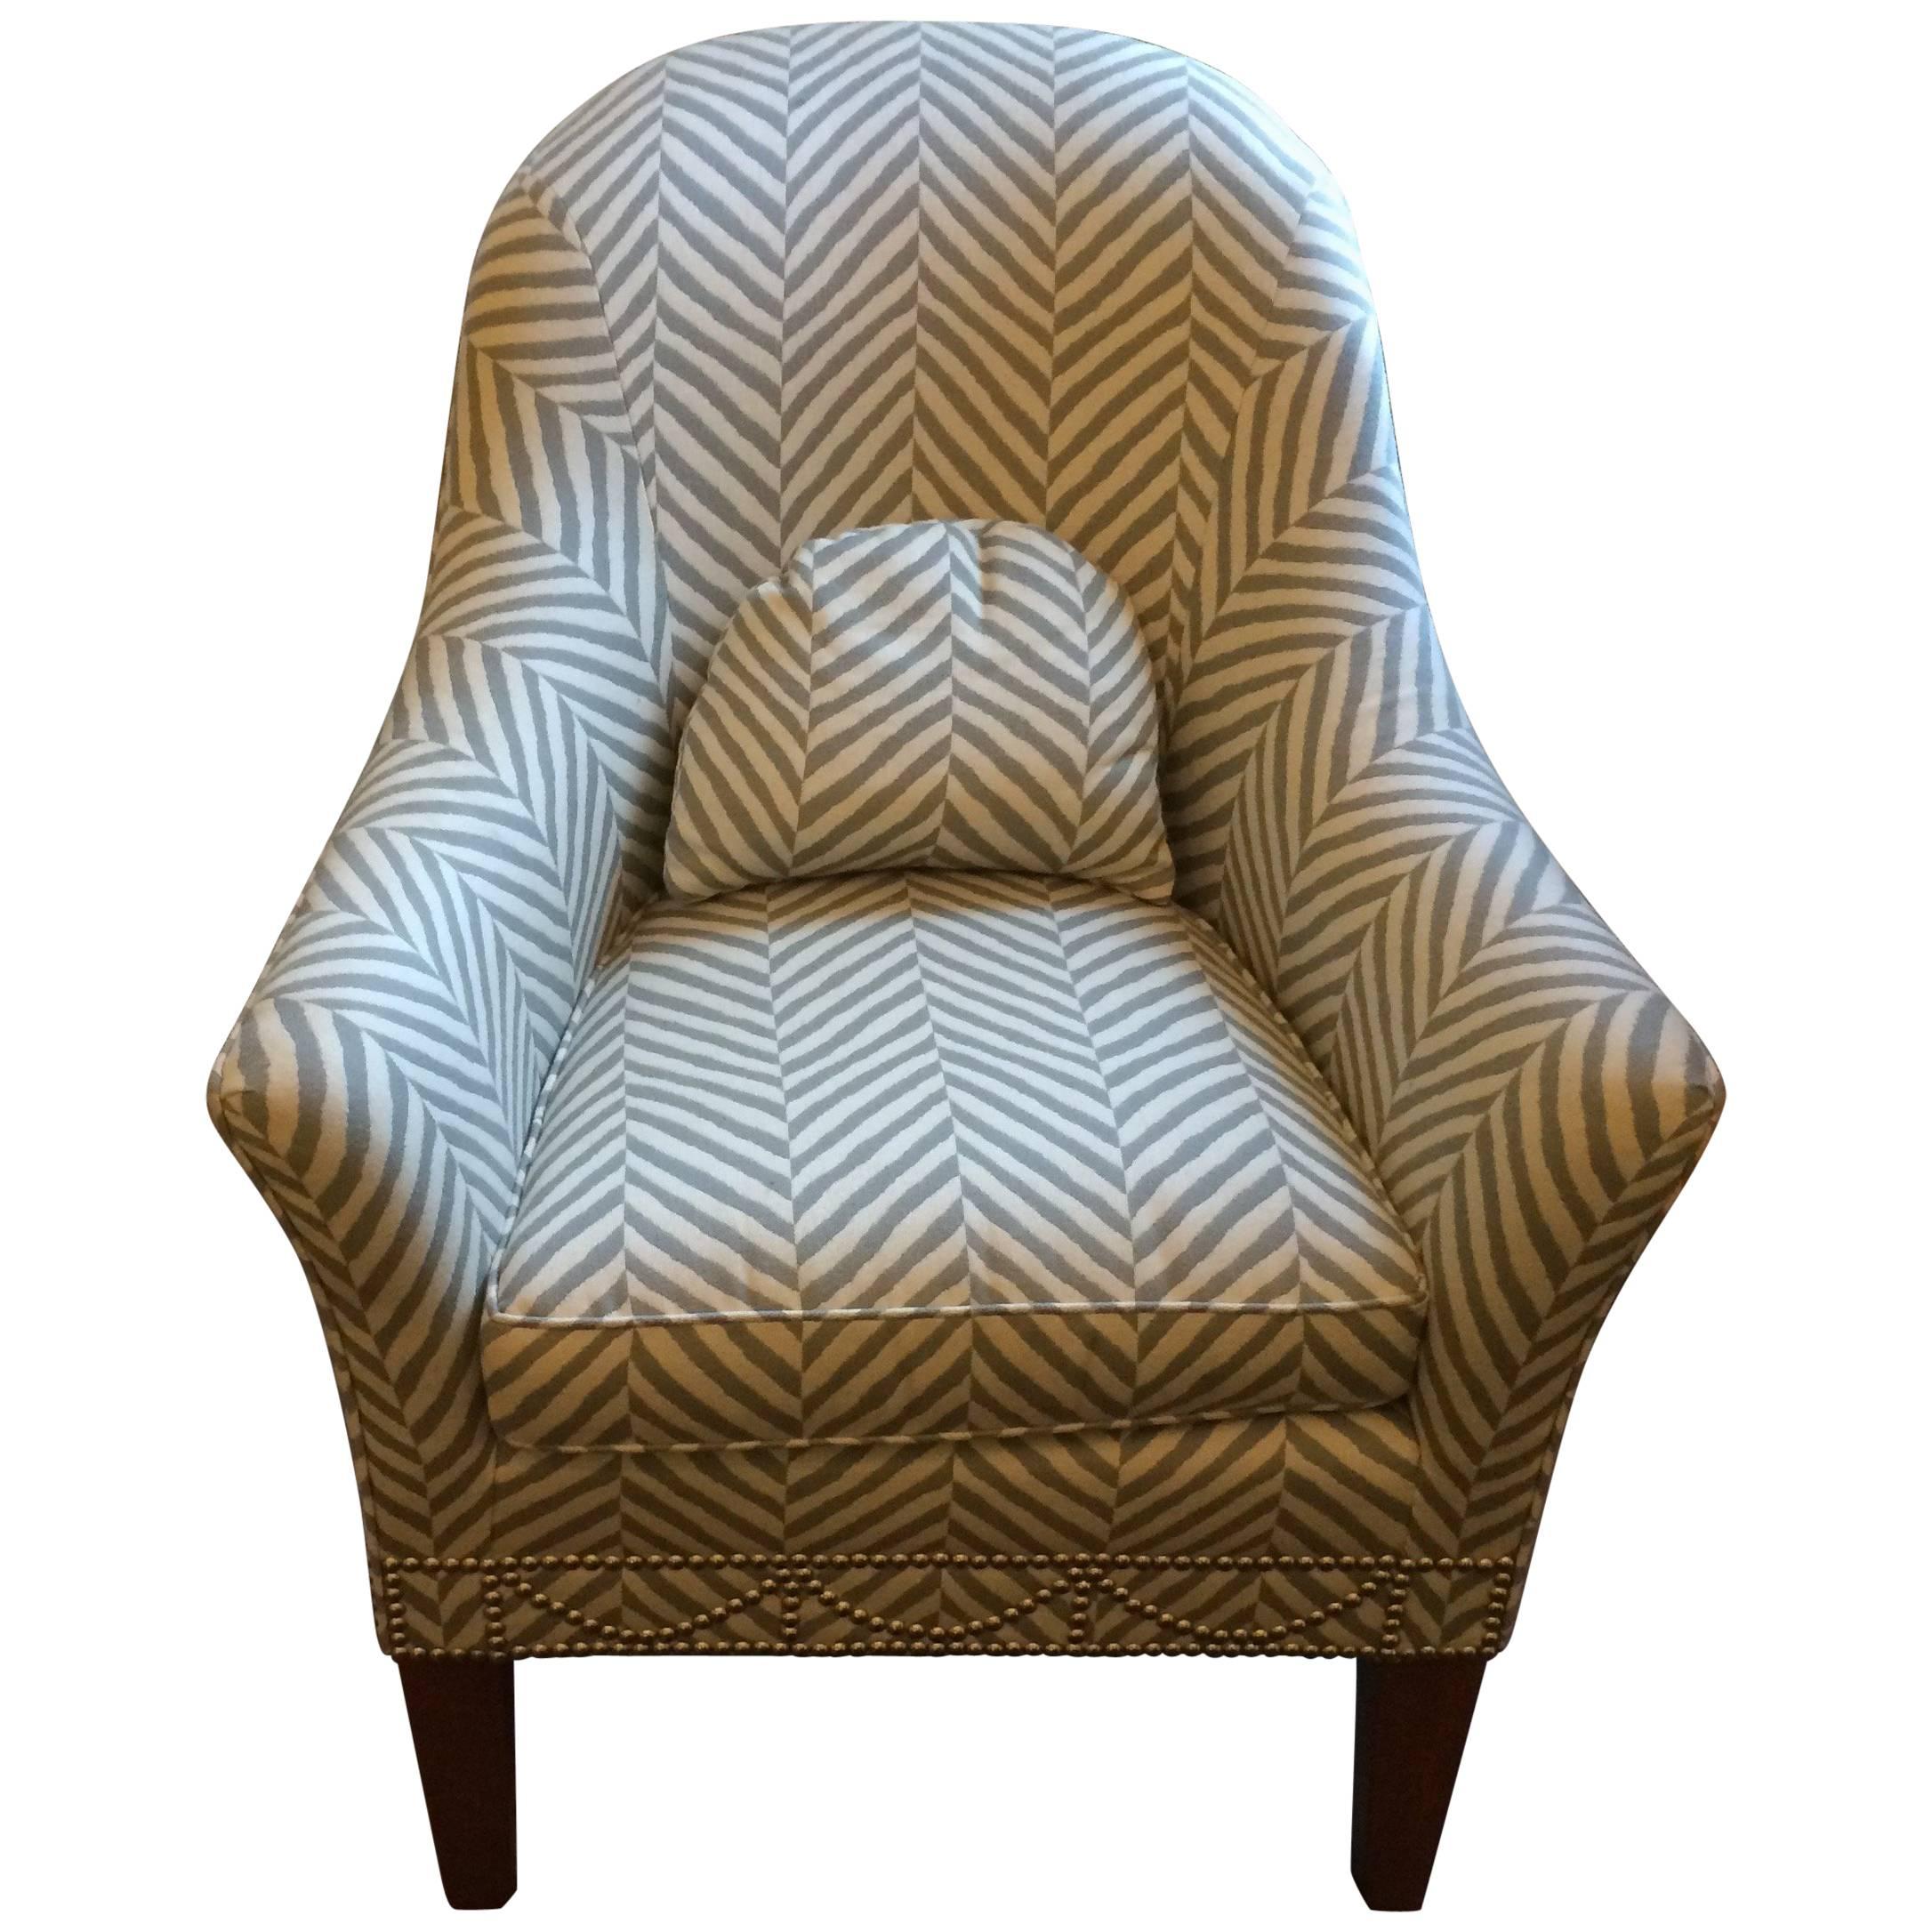 Stunning Grey and White Chevron Upholstered Club Chair